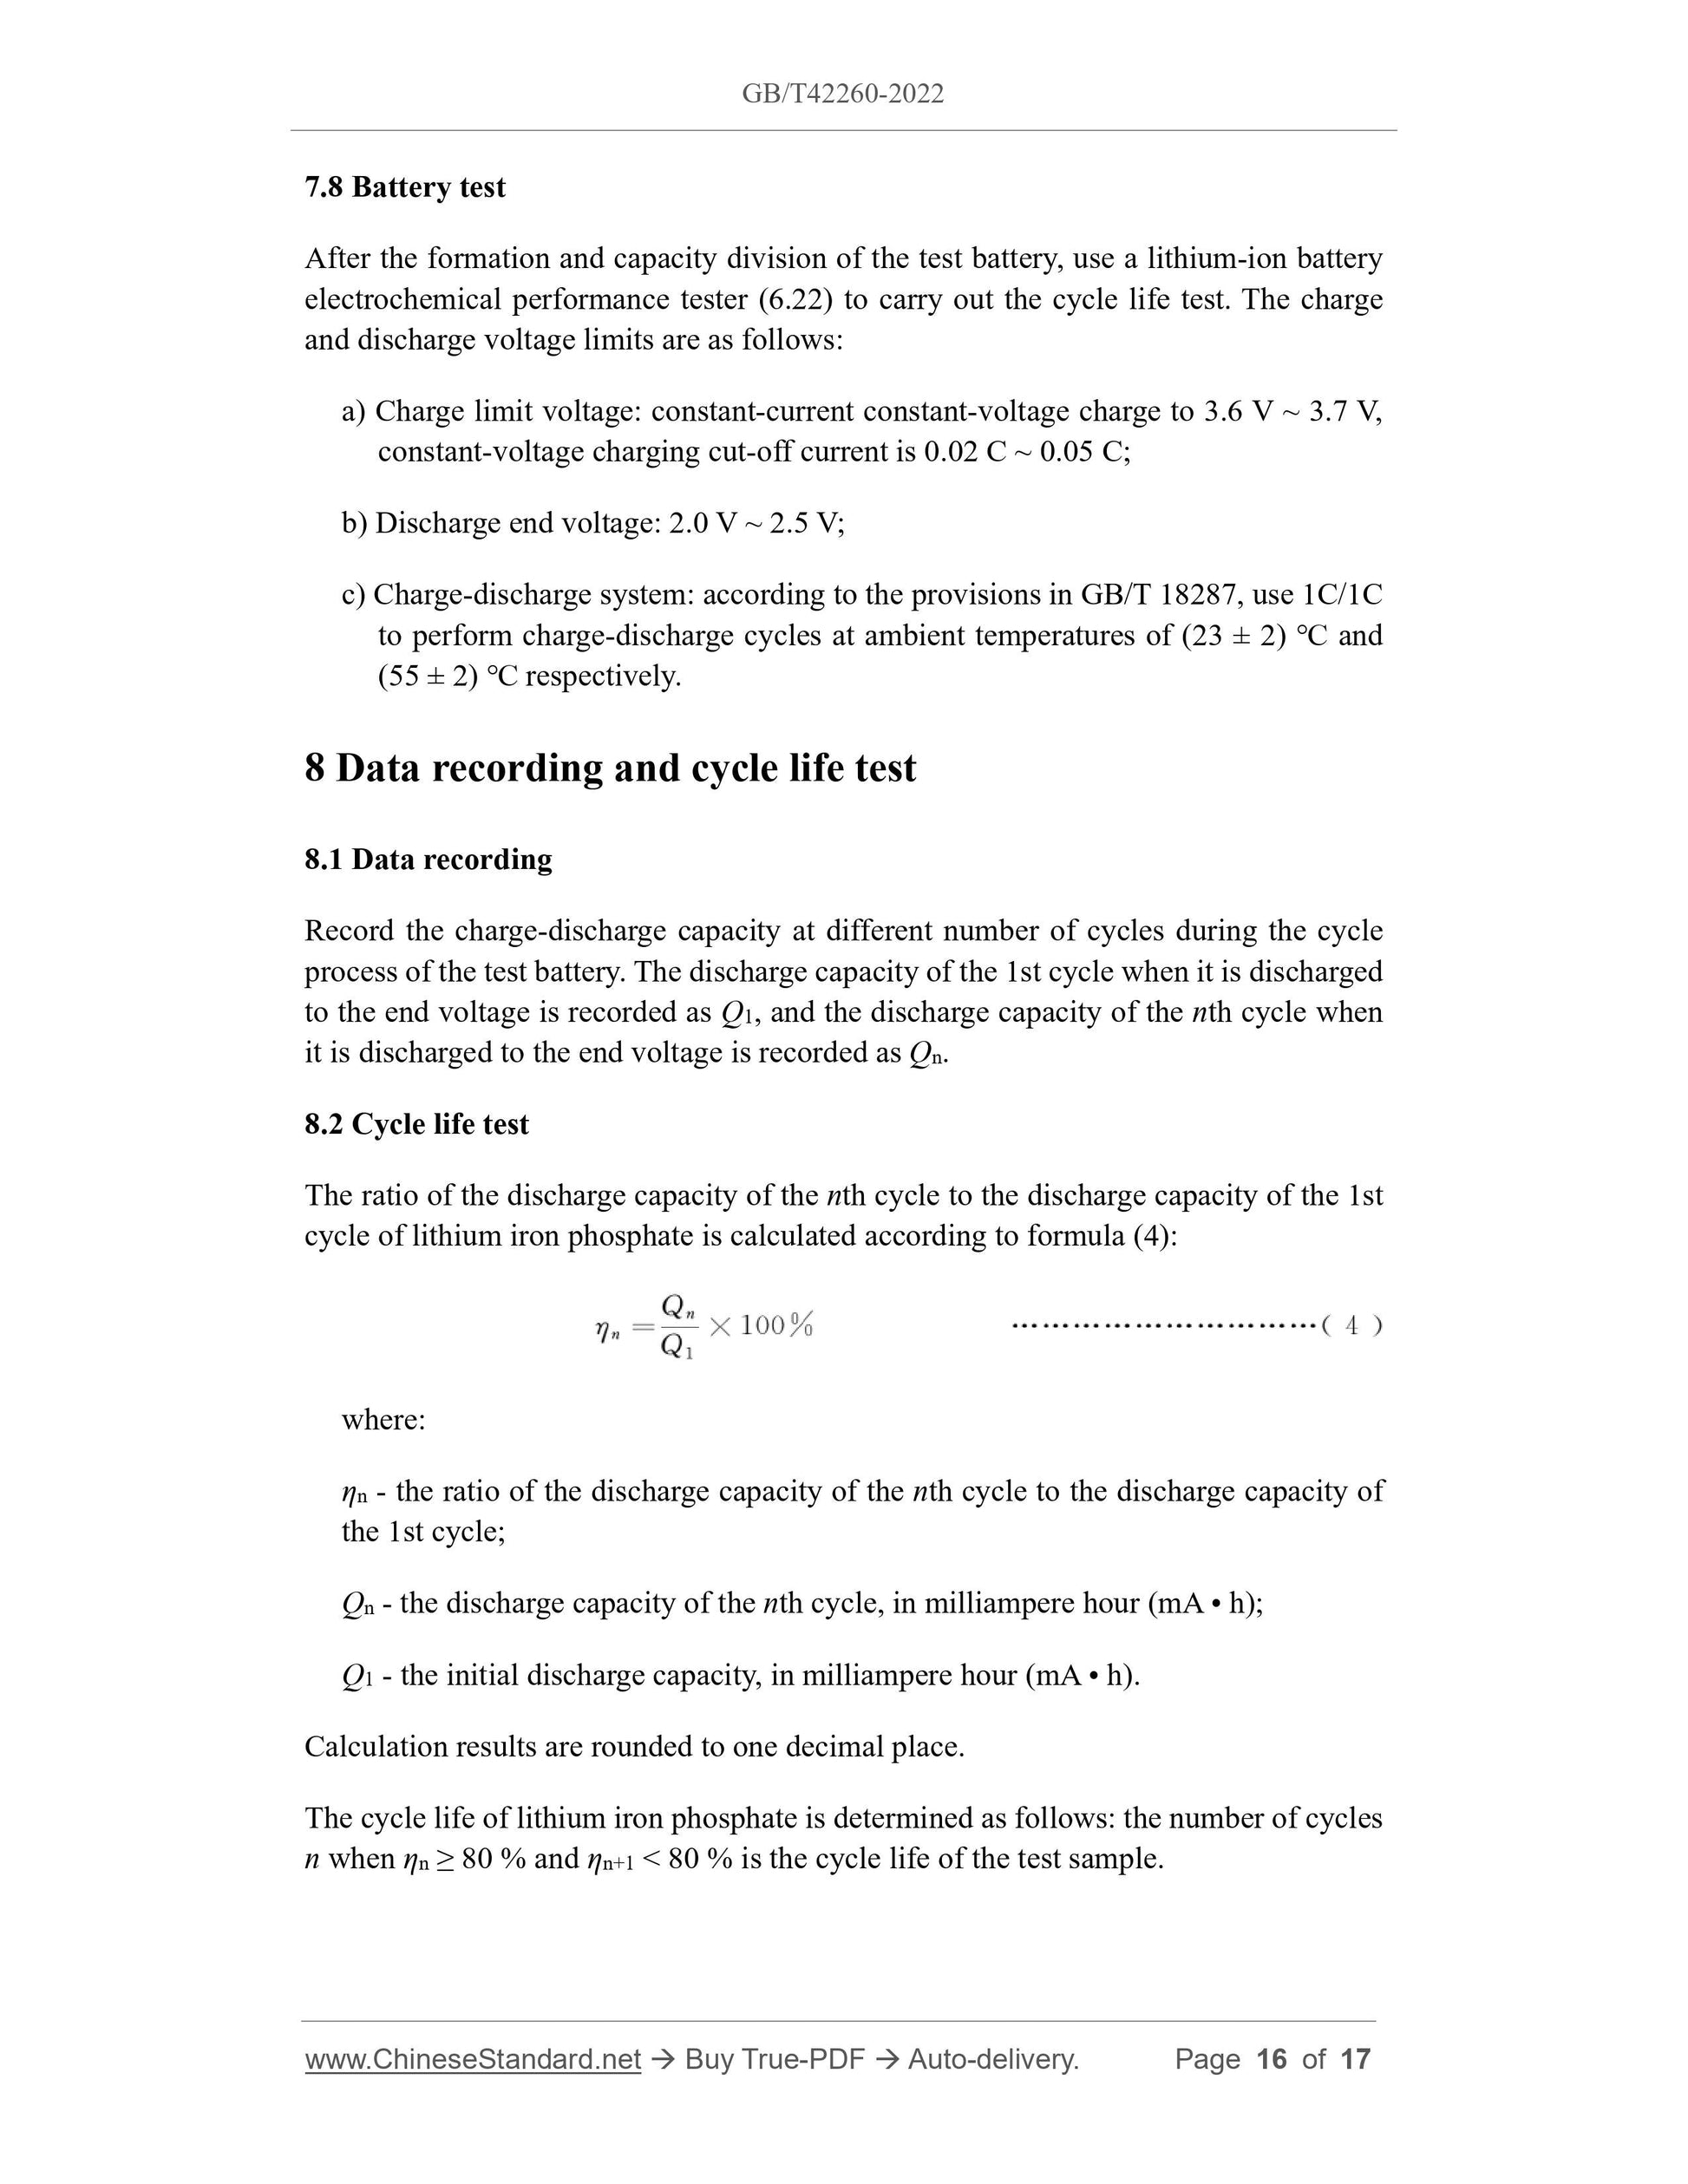 GB/T 42260-2022 Page 11